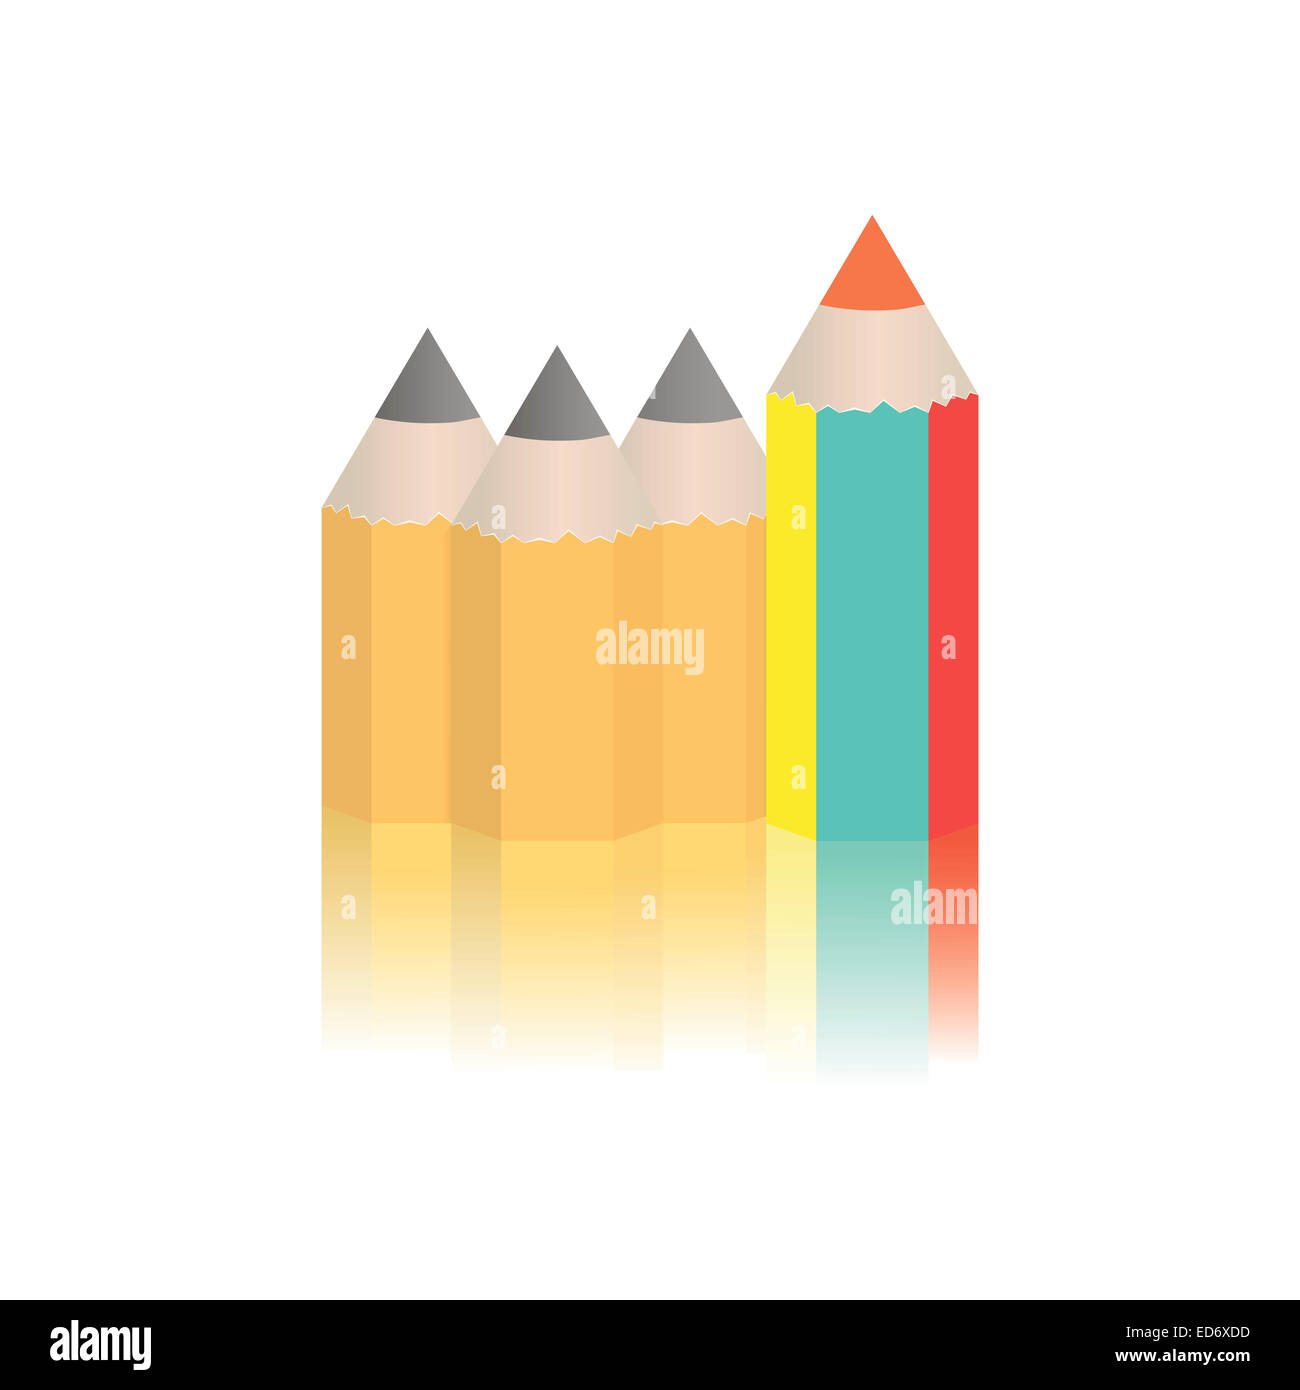 Pastel Colors Soft Colored Baby Crayons Short Pencils Loosely